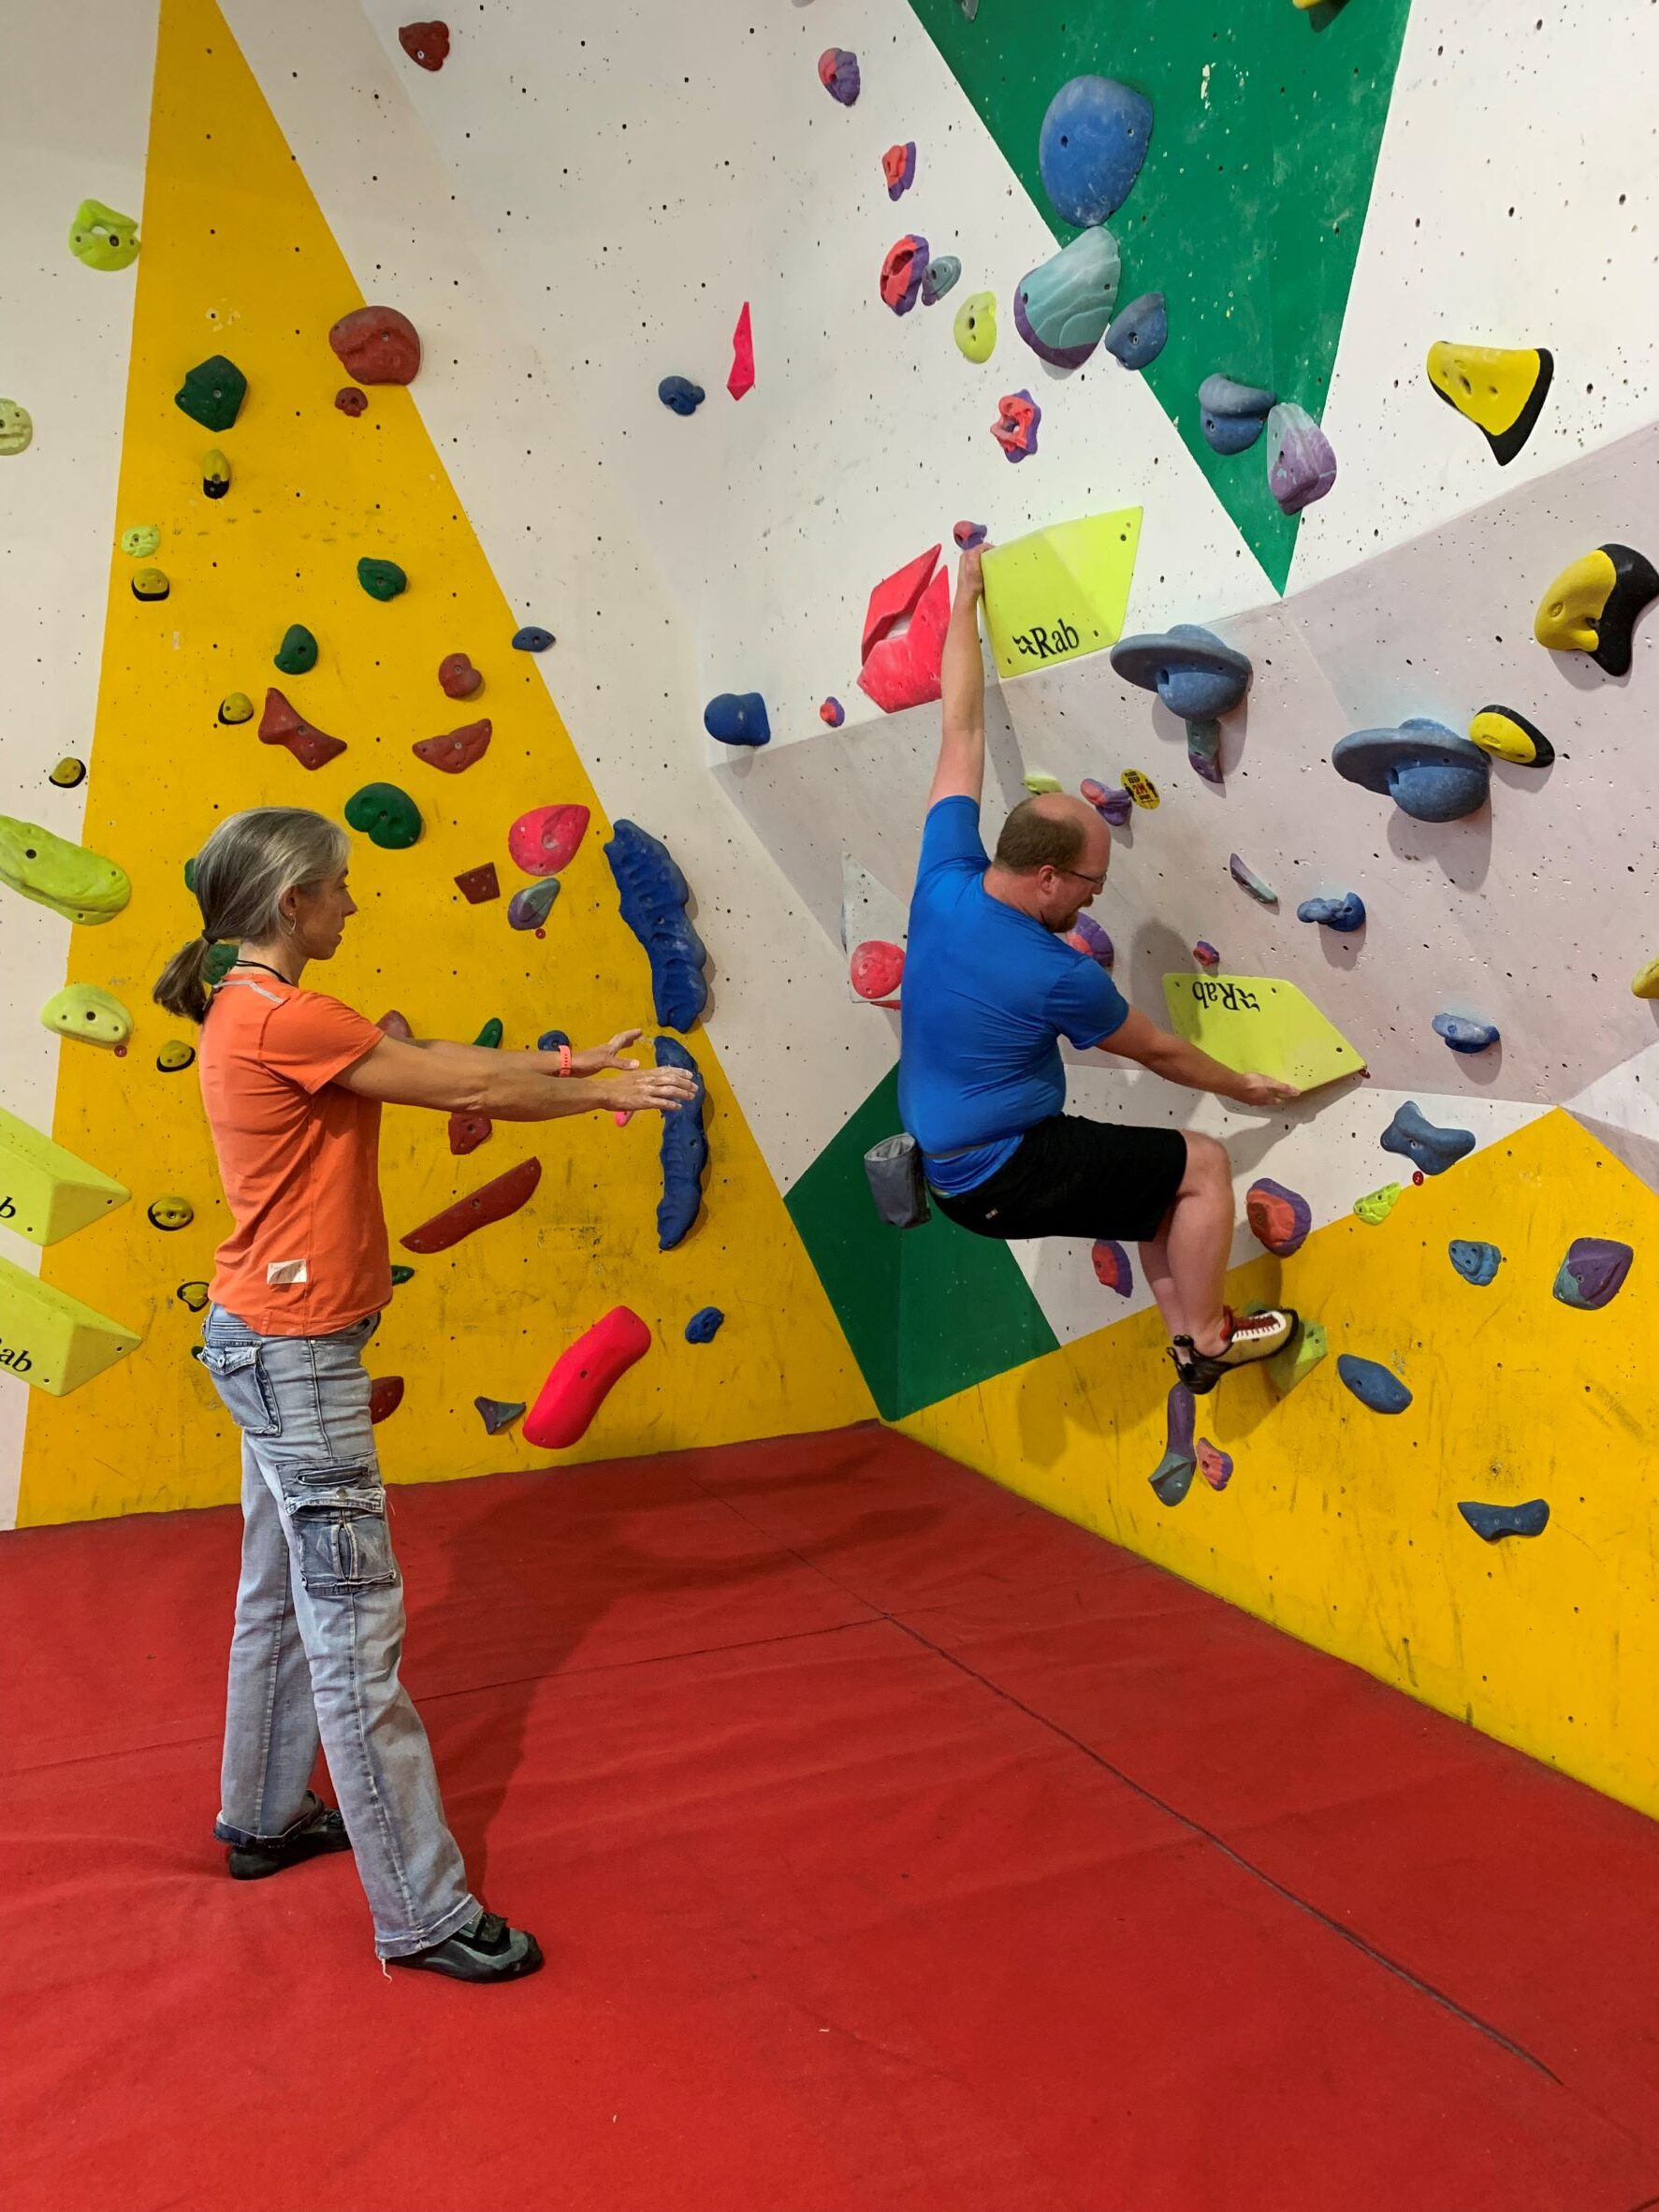 Becca Lounds coaching a student on the bouldering wall